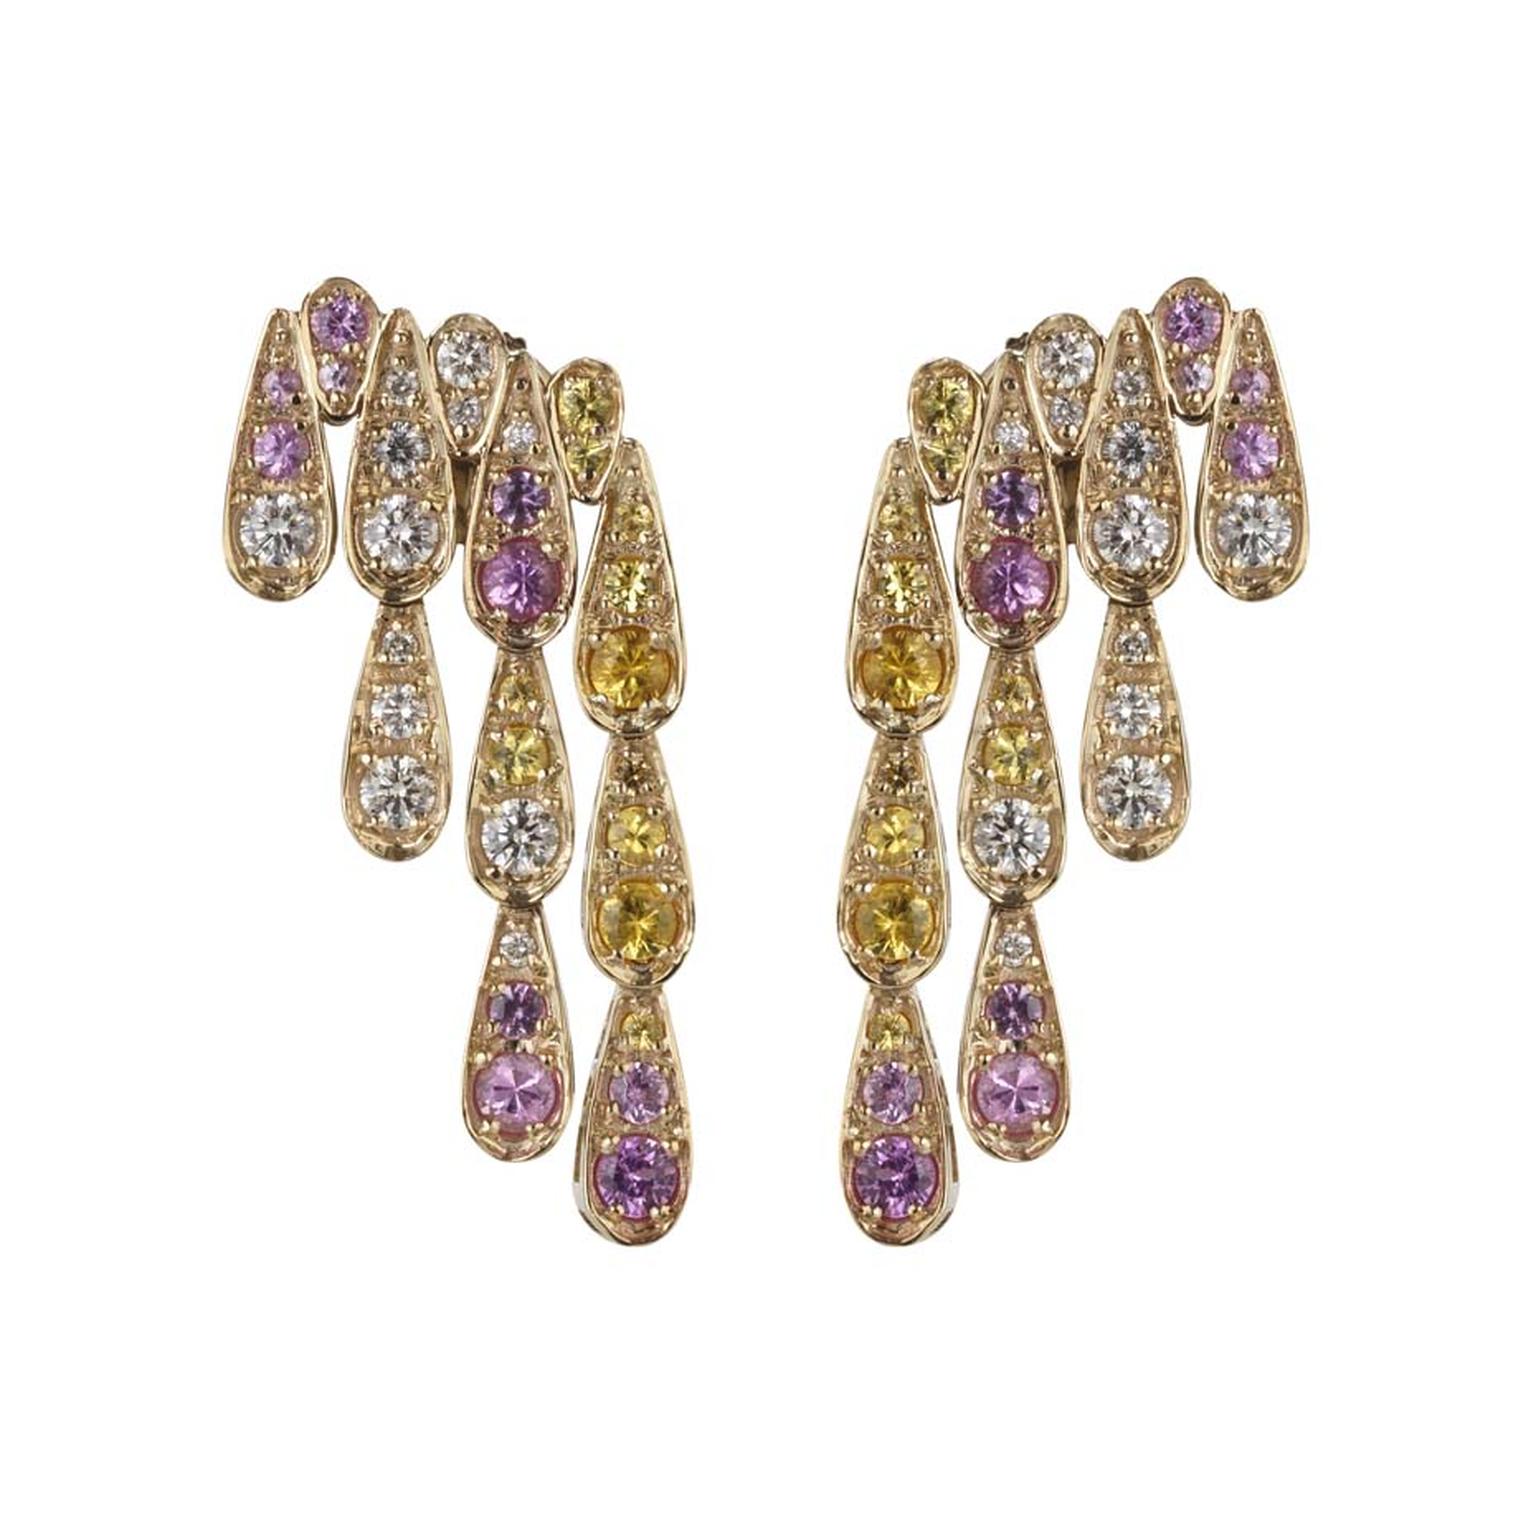 Sabine G for Latest Revival one-of-a-kind Harlequin yellow gold earrings featuring pink and yellow sapphires and diamonds.